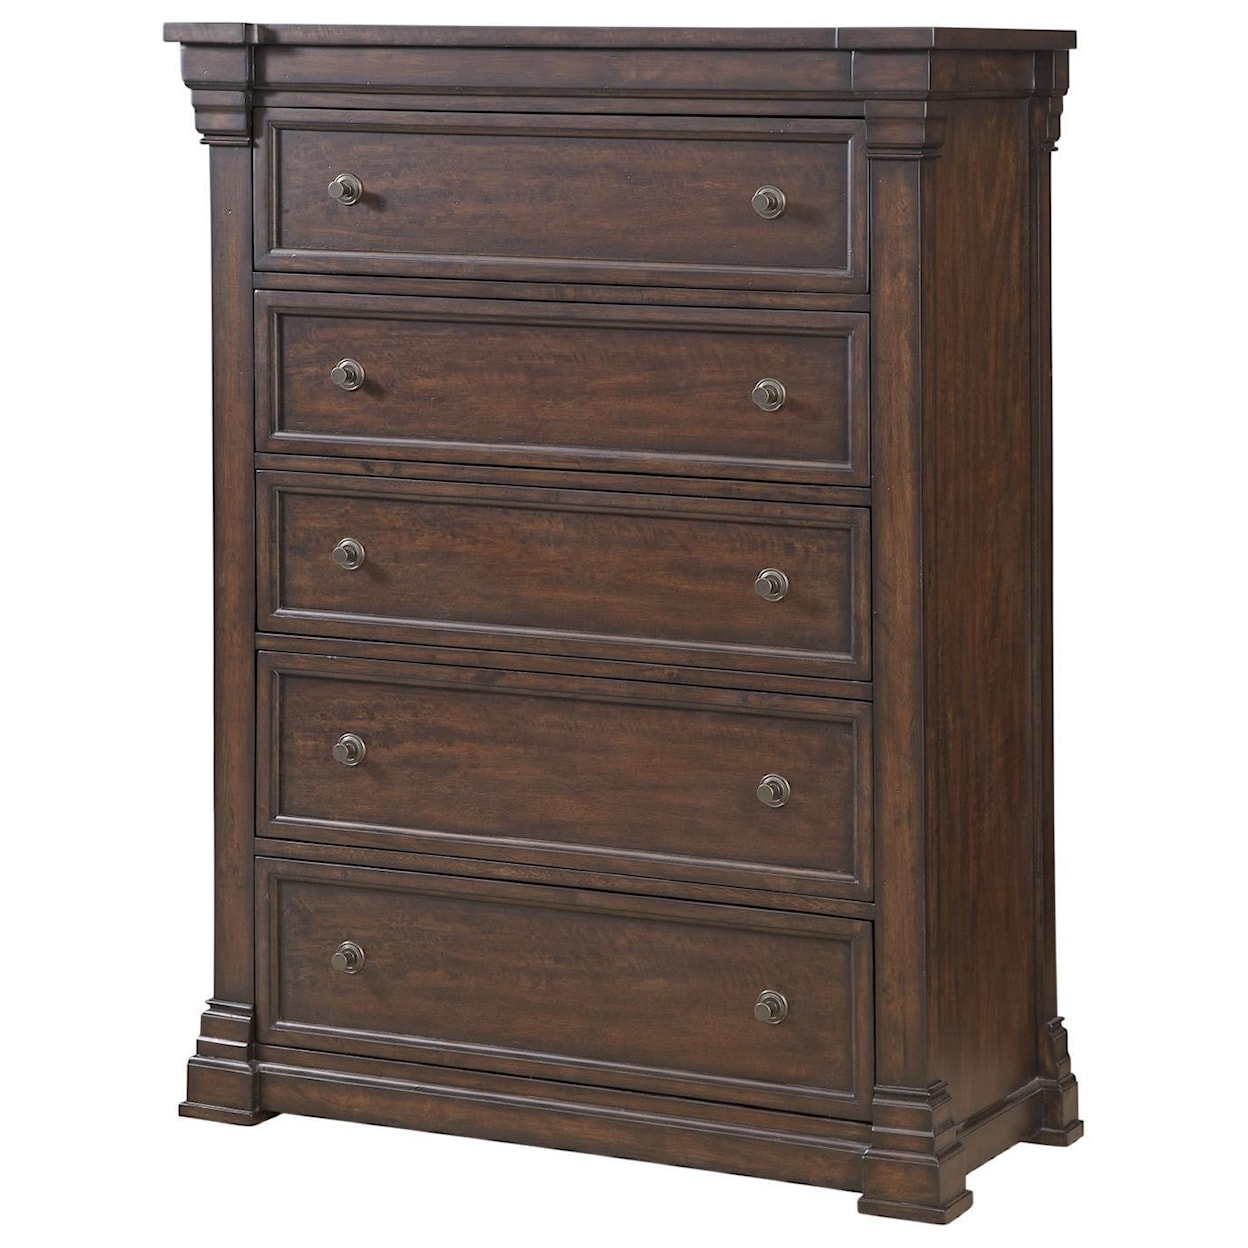 American Woodcrafters Kestrel Hills chest